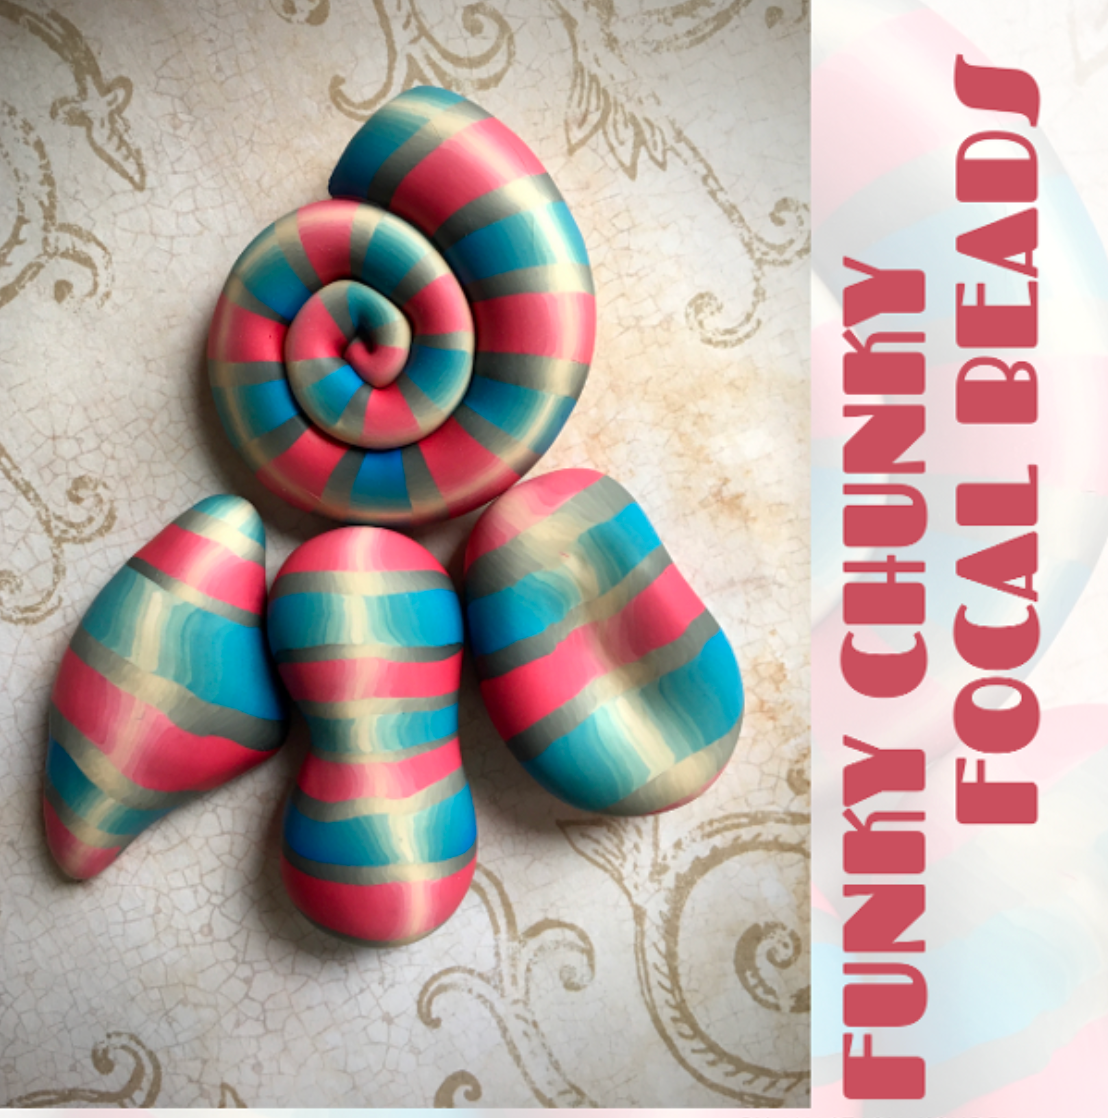 Beads - DIGITAL January 2021 Passion for Polymer clay magazine- PDF download